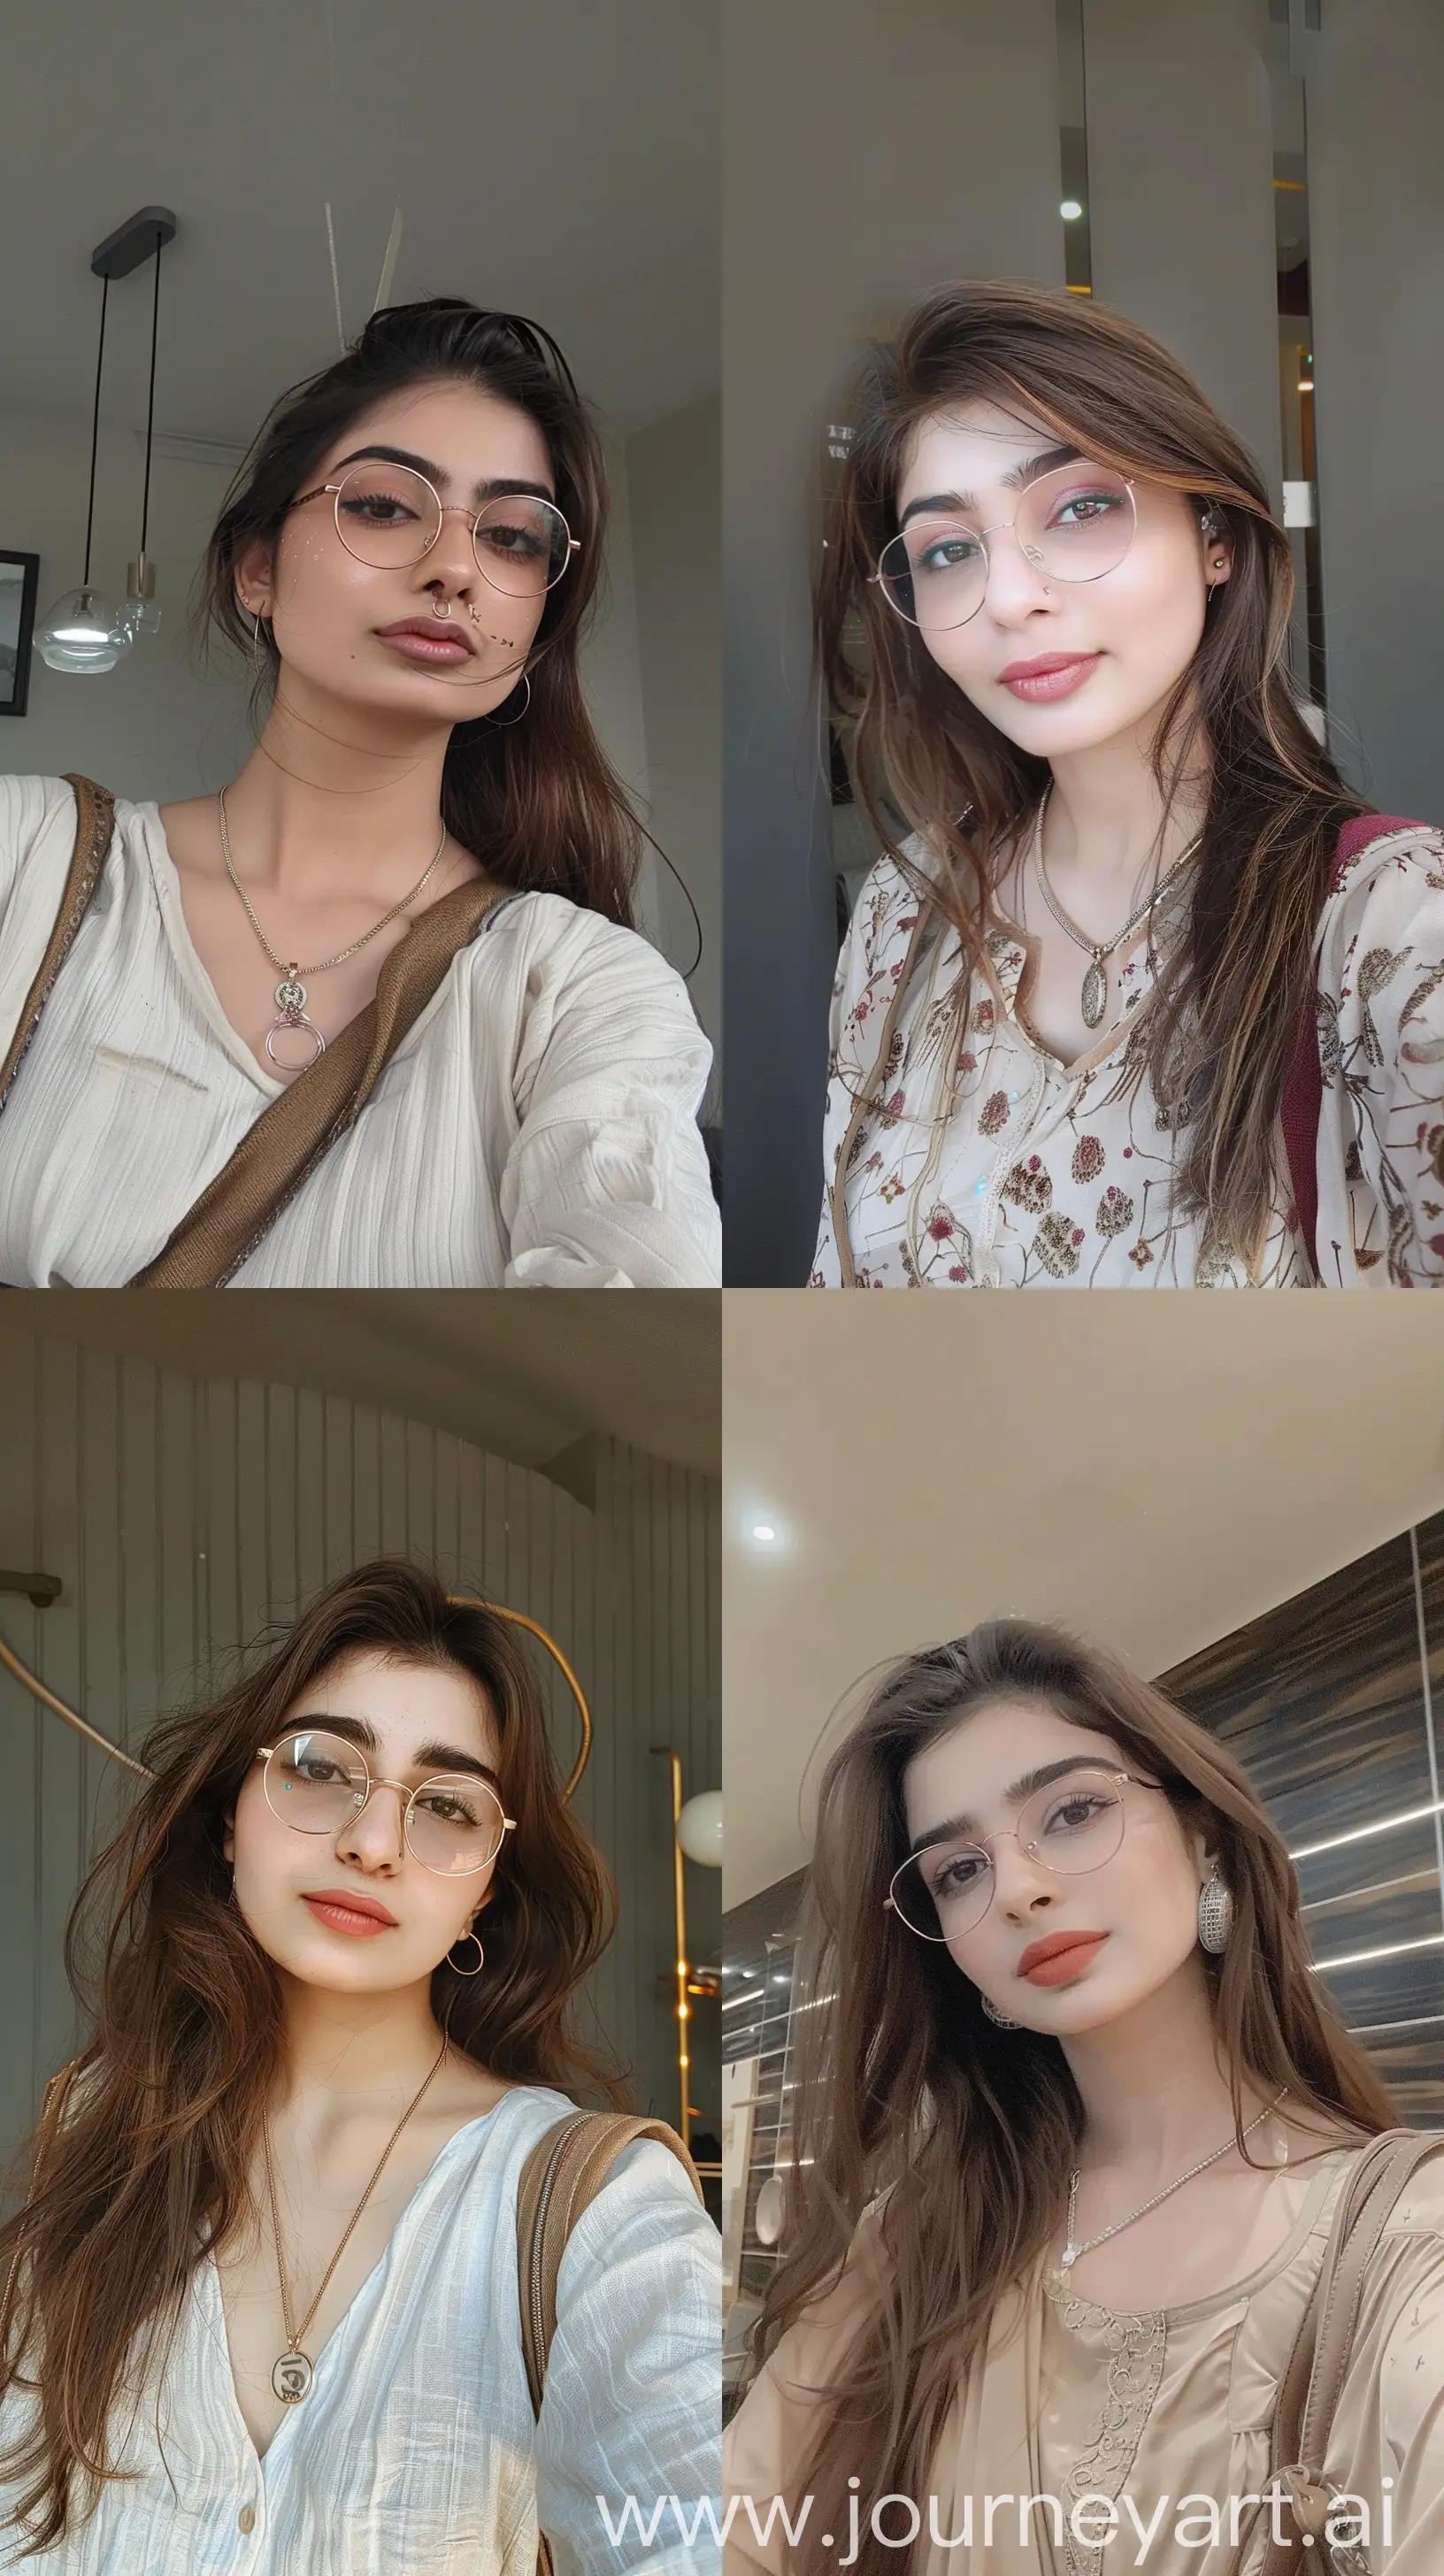 Stylish-Pakistani-Girl-Selfie-with-Aesthetic-Makeup-and-Accessories